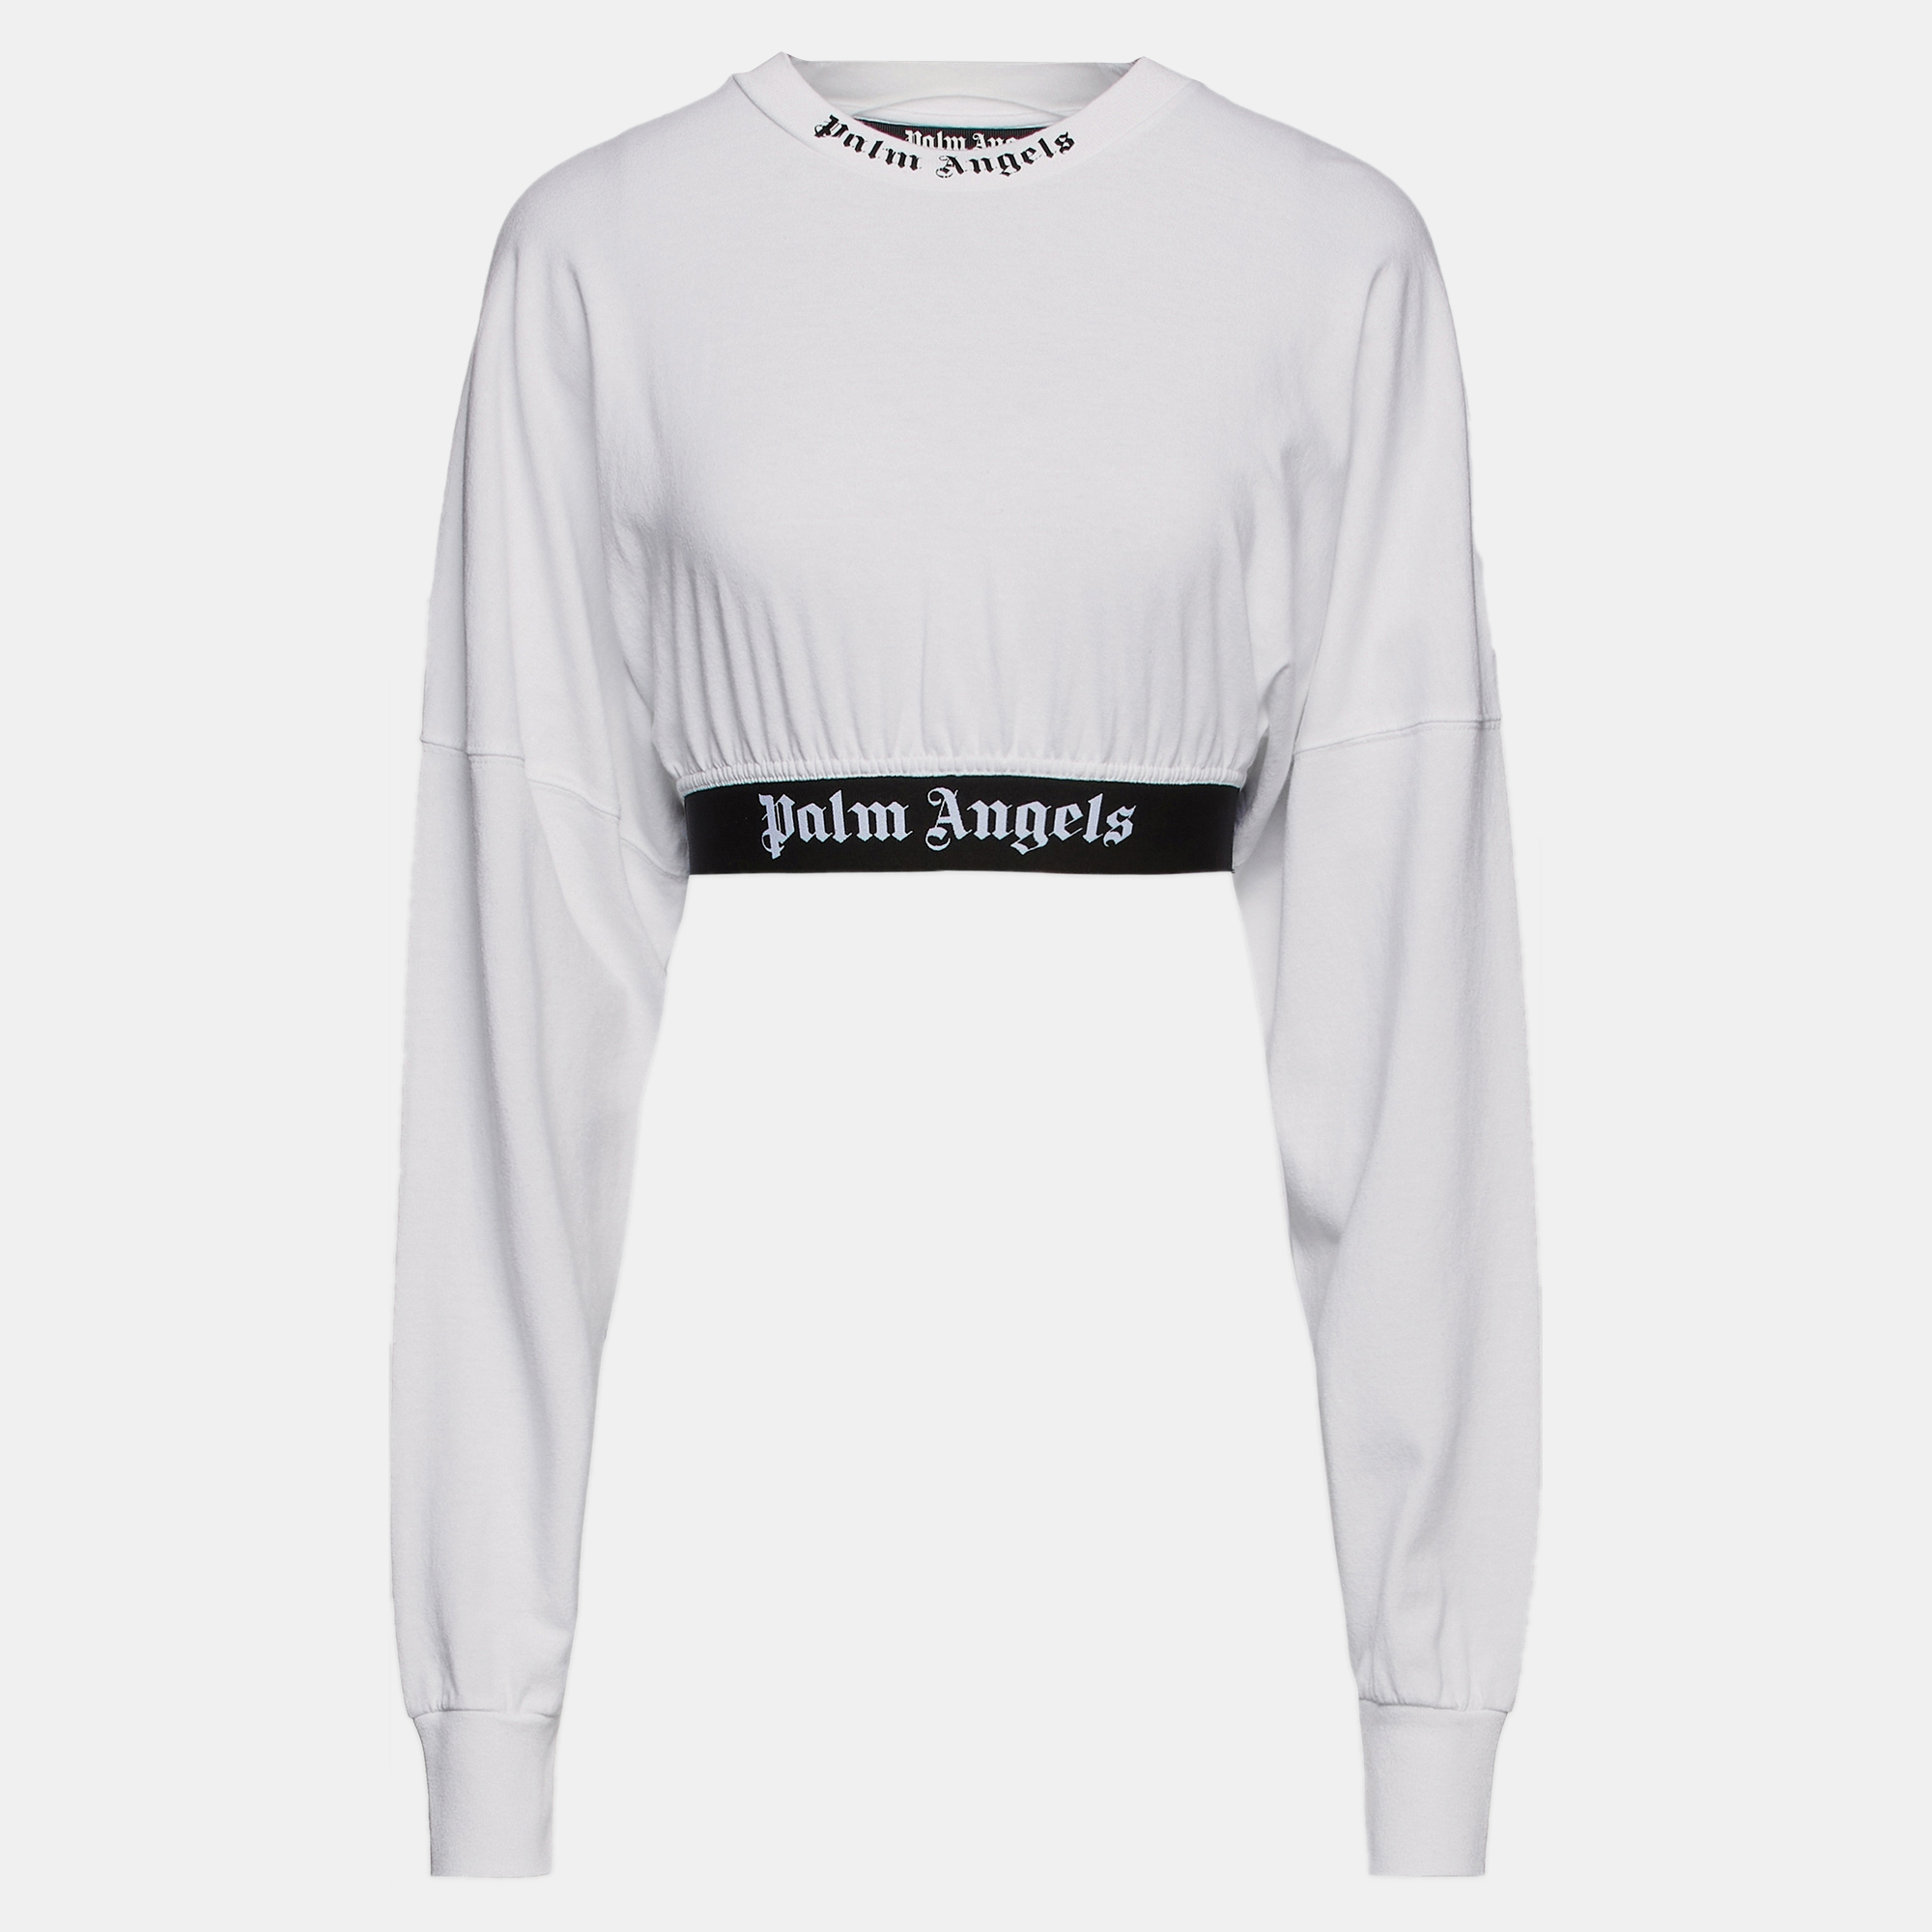 Palm angels cotton long sleeved top m